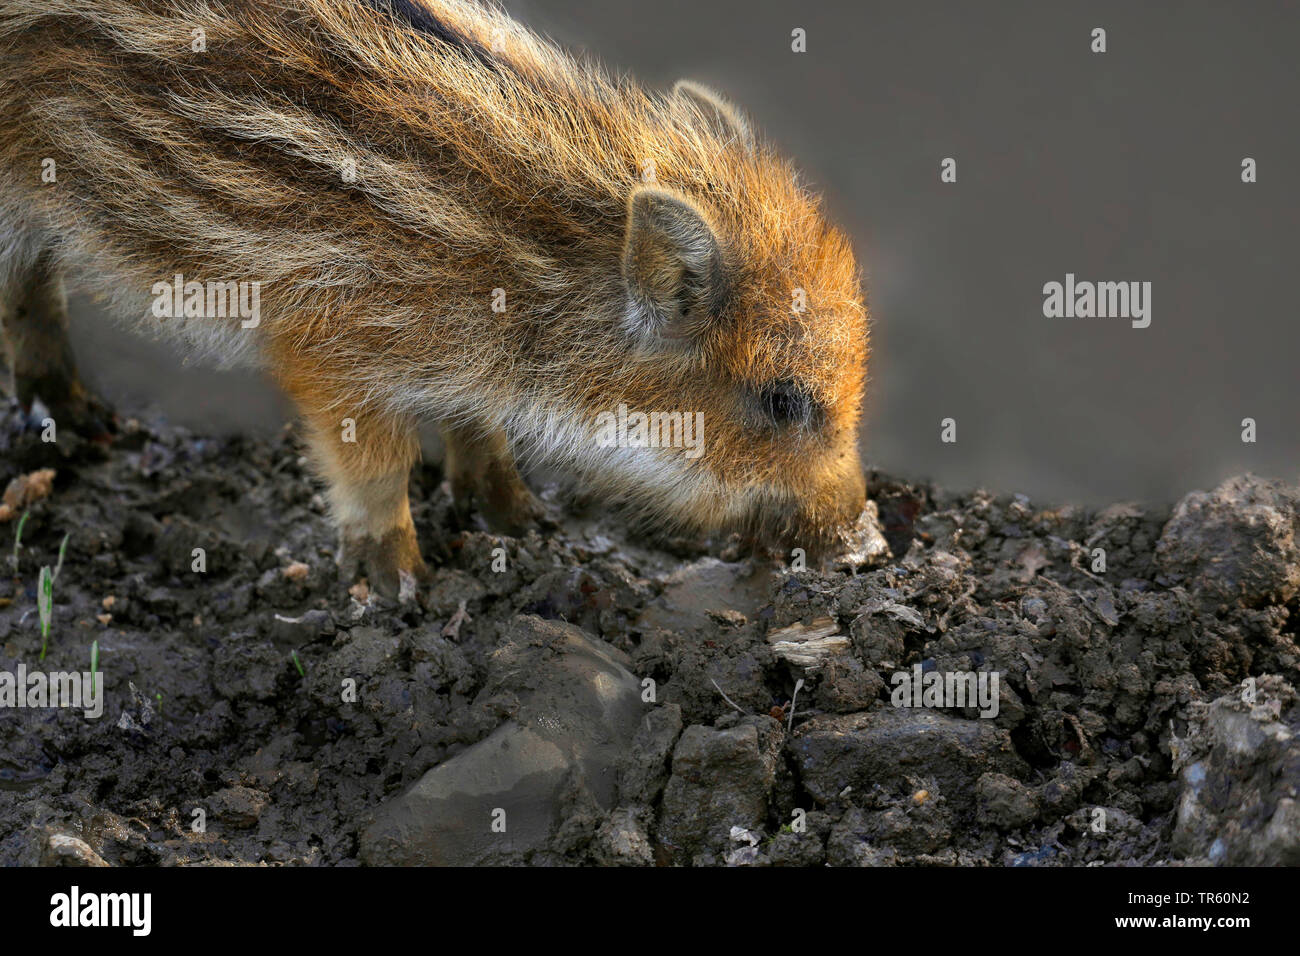 wild boar, pig, wild boar (Sus scrofa), shaot rooting in the soil, side view, Germany Stock Photo